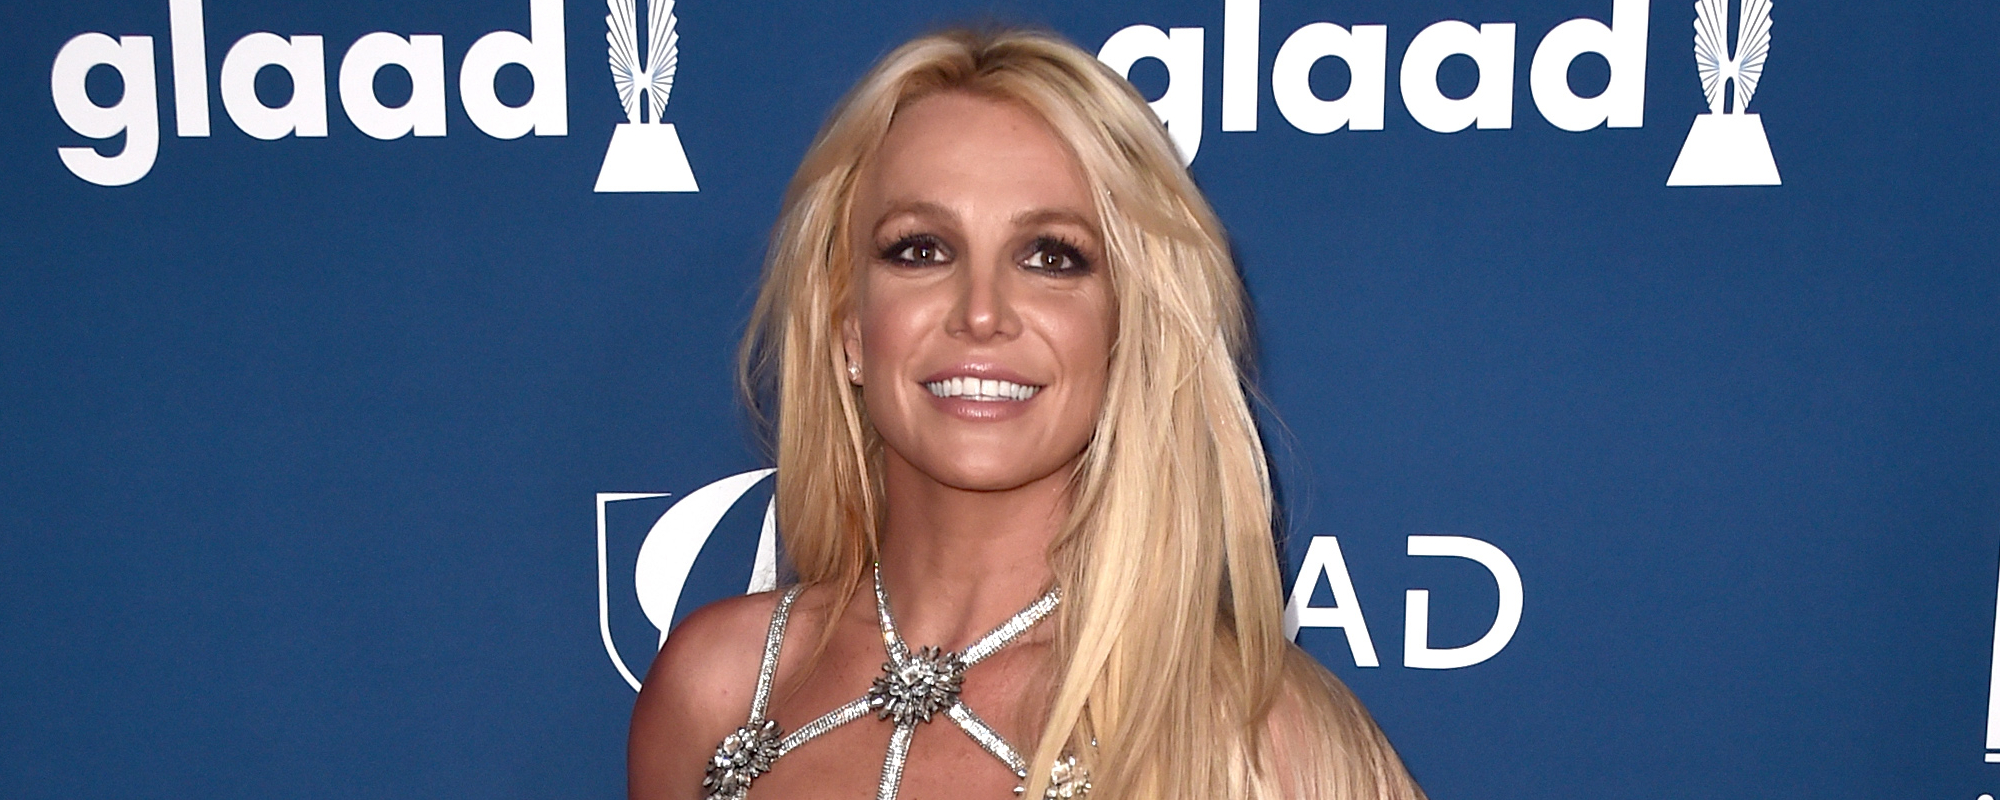 Britney Spears Posts Cryptic Message on Instagram as Justin Timberlake Saga Takes Another Turn